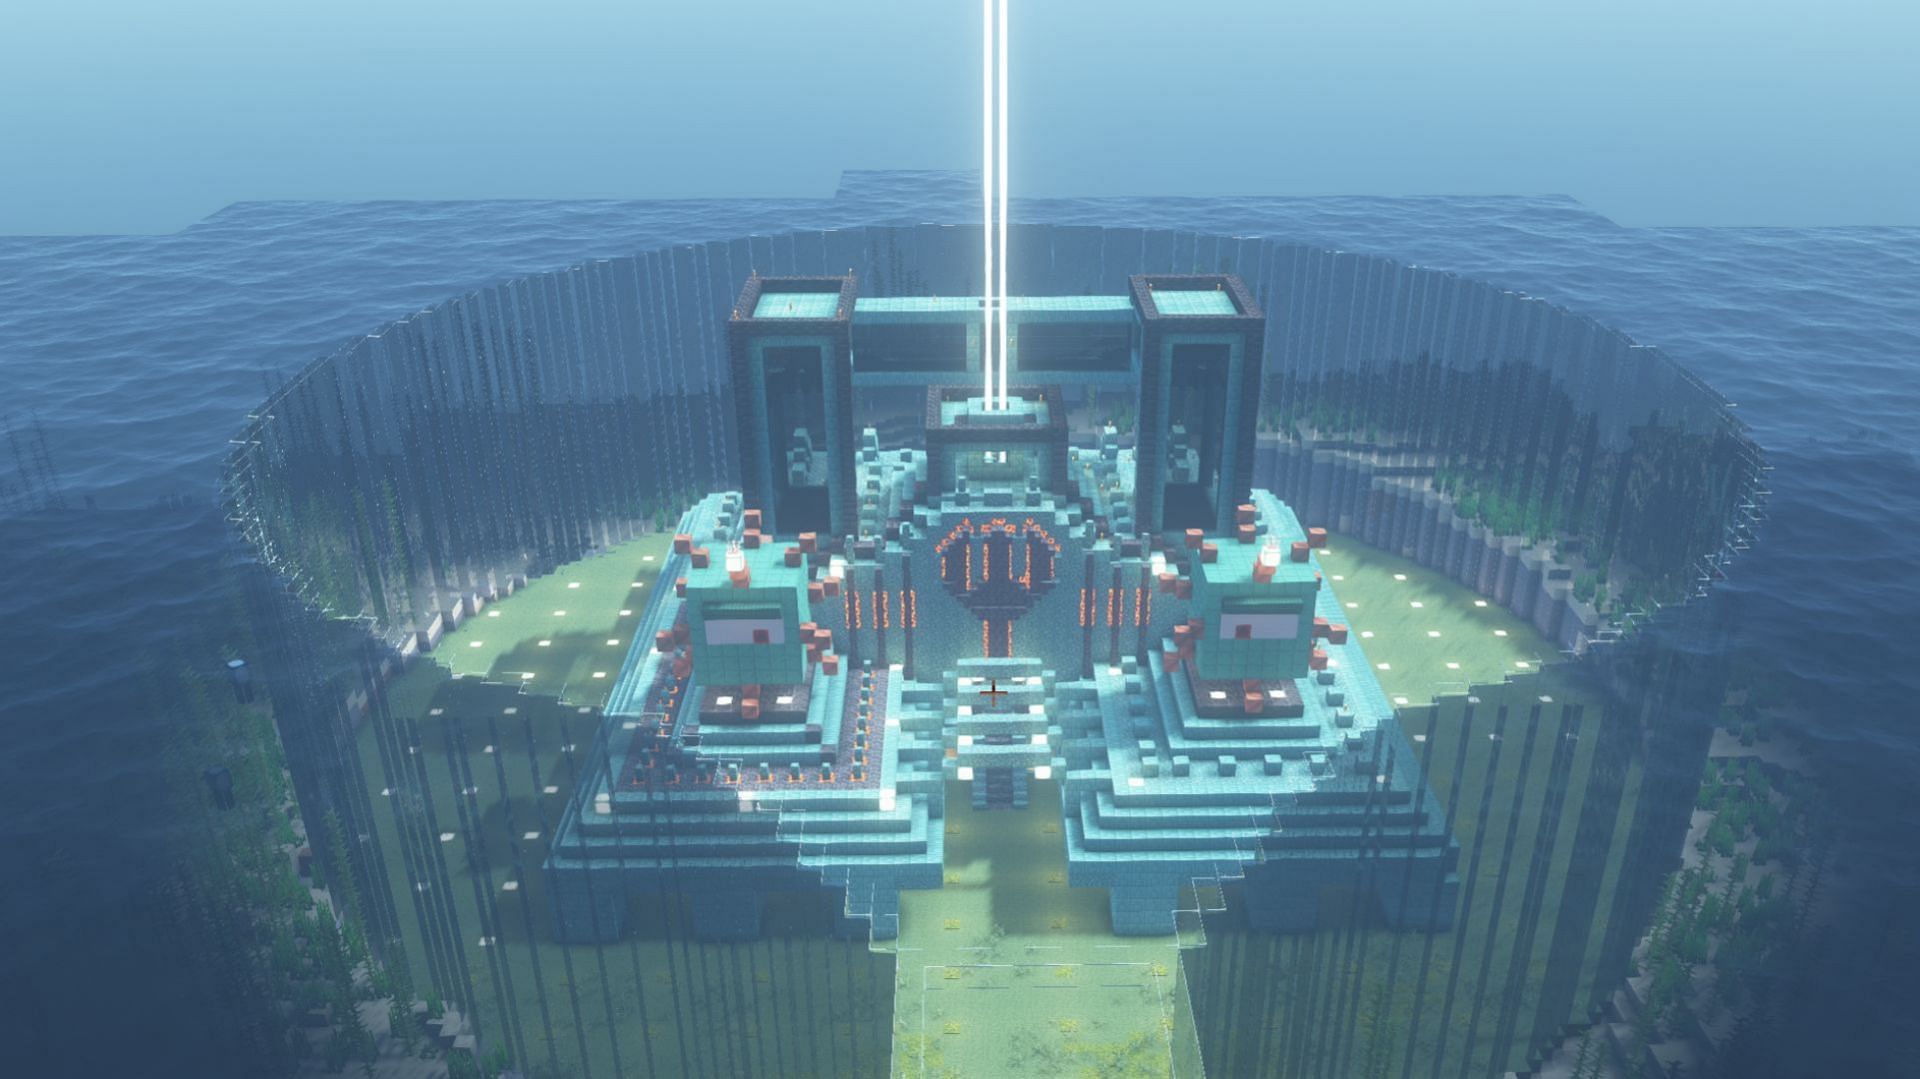 Ocean Monument base is one of the easiest mega structures to create in Minecraft (Image via Reddit / u/Bhalial)